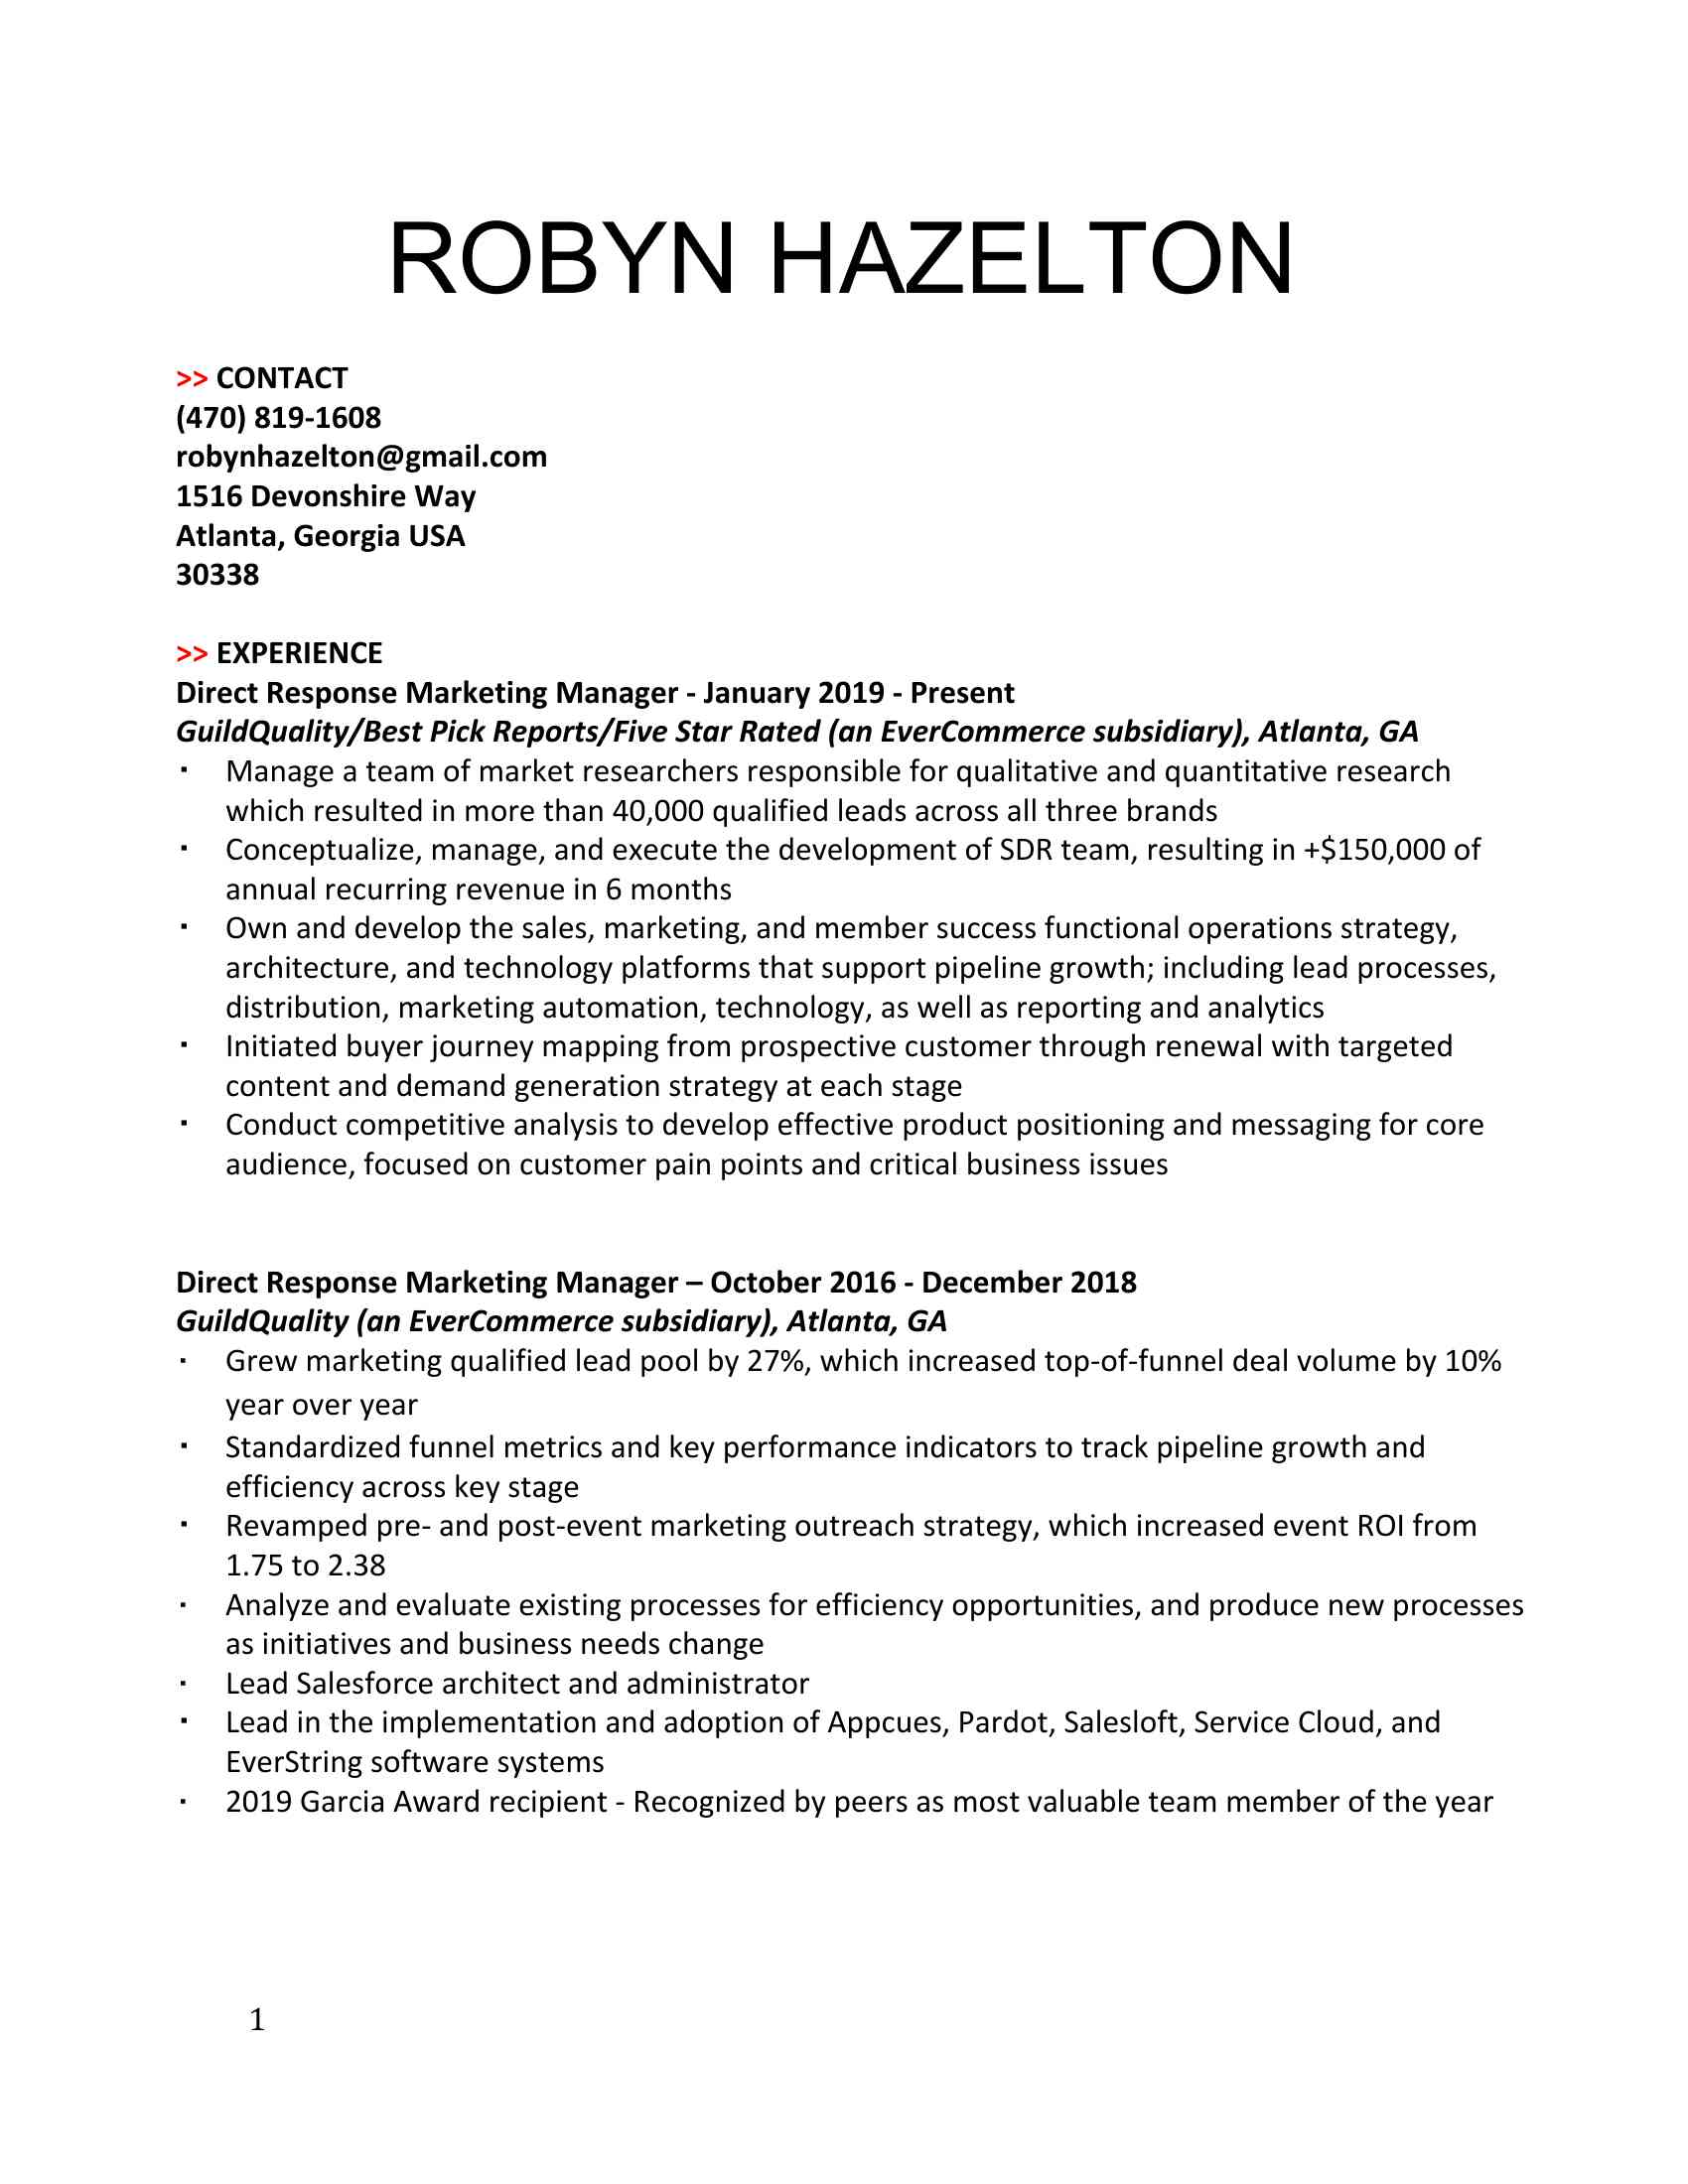 ROBYN HAZELTON >> CONTACT (XXX) XXX-XXXX <BR>XXXX@XXXX.XXX <BR>1516 Devonshire Way <BR>Atlanta, Georgia USA <BR>30338 >> EXPERIENCE <BR>Direct Response Marketing Manager - January 2019 - Present <BR>GuildQuality/Best Pick Reports/Five Star Rated (an EverCommerce subsidiary), Atlanta, GA <BR>Manage a team of market researchers responsible for qualitative and quantitative research which resulted in more than 40,000 qualified leads across all three brands <BR>Conceptualize, manage, and execute the development of SDR team, resulting in +$150,000 of annual recurring revenue in 6 months <BR>Own and develop the sales, marketing, and member success functional operations strategy, architecture, and technology platforms that support pipeline growth; including lead processes, distribution, marketing automation, technology, as well as reporting and analytics <BR>Initiated buyer journey mapping from prospective customer through renewal with targeted content and demand generation strategy at each stage <BR>Conduct competitive analysis to develop effective product positioning and messaging for core audience, focused on customer pain points and critical business issues Direct Response Marketing Manager – October 2016 - December 2018 <BR>GuildQuality (an EverCommerce subsidiary), Atlanta, GA <BR>Grew marketing qualified lead pool by 27%, which increased top-of-funnel deal volume by 10% year over year <BR>Standardized funnel metrics and key performance indicators to track pipeline growth and efficiency across key stage <BR>Revamped pre- and post-event marketing outreach strategy, which increased event ROI from 1.75 to 2.38 <BR>Analyze and evaluate existing processes for efficiency opportunities, and produce new processes as initiatives and business needs change <BR>Lead Salesforce architect and administrator <BR>Lead in the implementation and adoption of Appcues, Pardot, Salesloft, Service Cloud, and EverString software systems <BR>XXXXXX recipient - Recognized by peers as most valuable team member of the year Marketing and Operations Consultant – April 2016 - September 2016   <BR>Slingshot Entertainment, Atlanta, GA <BR>Coordinated, facilitated, and launched new waiver and customer database to cloud application that improved day-to-day efficiency and provided control for reporting and planning purposes <BR>Implemented and created a new revenue source membership program, which grossed more than $30,XXXXXX two months of implementation <BR>Developed and created new mobile-friendly website and implemented analytic tools and conversion goals to accurately measure ROI, resulting in over XXXXXX 1 month after launch <BR>Created and managed all website and social content <BR>Worked alongside operations team to increase organizational productivity and accountability <BR>Assisted in the development of all package pricing to increase profitability margins <BR>Created tracking and budgeting system in order to better analyze ROI for all advertising mediums <BR>Created new ticketing packages for general admissions based on business needs and feedback <BR>Design and creation of all marketing materials, planning and day-to-day execution of all marketing campaigns and promotional campaigns including brand standards, website content, and social media platforms Coordinator, Marketing and Communications – October 2013 - December 2015   <BR>Dawson Dental Centres, Newmarket, ON <BR>Primary responsibility for increasing new business across all 25+ Dawson Dental Centre locations <BR>Owned and executed +$1M marketing budget designed for the promotion and execution of marketing programs, including revenue generation, event planning, and promotion <BR>Created and implemented Net Promoter Score for patients and Dawson team members, allowing us to gain in-the-moment feedback with no additional investment for the business <BR>Managed the onboarding of 7 new locations since January 2014, including creating awareness campaigns for patients transitioning locations <BR>Increased New Business Revenue by over $6M while executing on 75% of available budget <BR>Increased website traffic by 68% and improved conversion rate by 10% since January 2015 Assistant, Communications and Events – May 2010 – December 2012     <BR>Athletics Canada, Ottawa, ON   <BR>Served as media attache for the 2012 Olympic Paralympic Games and assisted in the production of all international and national competition media guides, media speaking notes, and press releases <BR>Organized Athletics Canada’s online store including inventory management, order fulfillment, and stock replacement <BR>Assisted in the launch of the Athletics Canada Hall of Fame and acted as a liaison for Athletics Canada annual awards committee <BR>Supported all aspects of planning and execution for the Canadian Championships, World Junior Championships, National Track League, and Athletics Canada annual general meeting <BR>Fulfilled all media interview and photo requests in both English and French <BR>